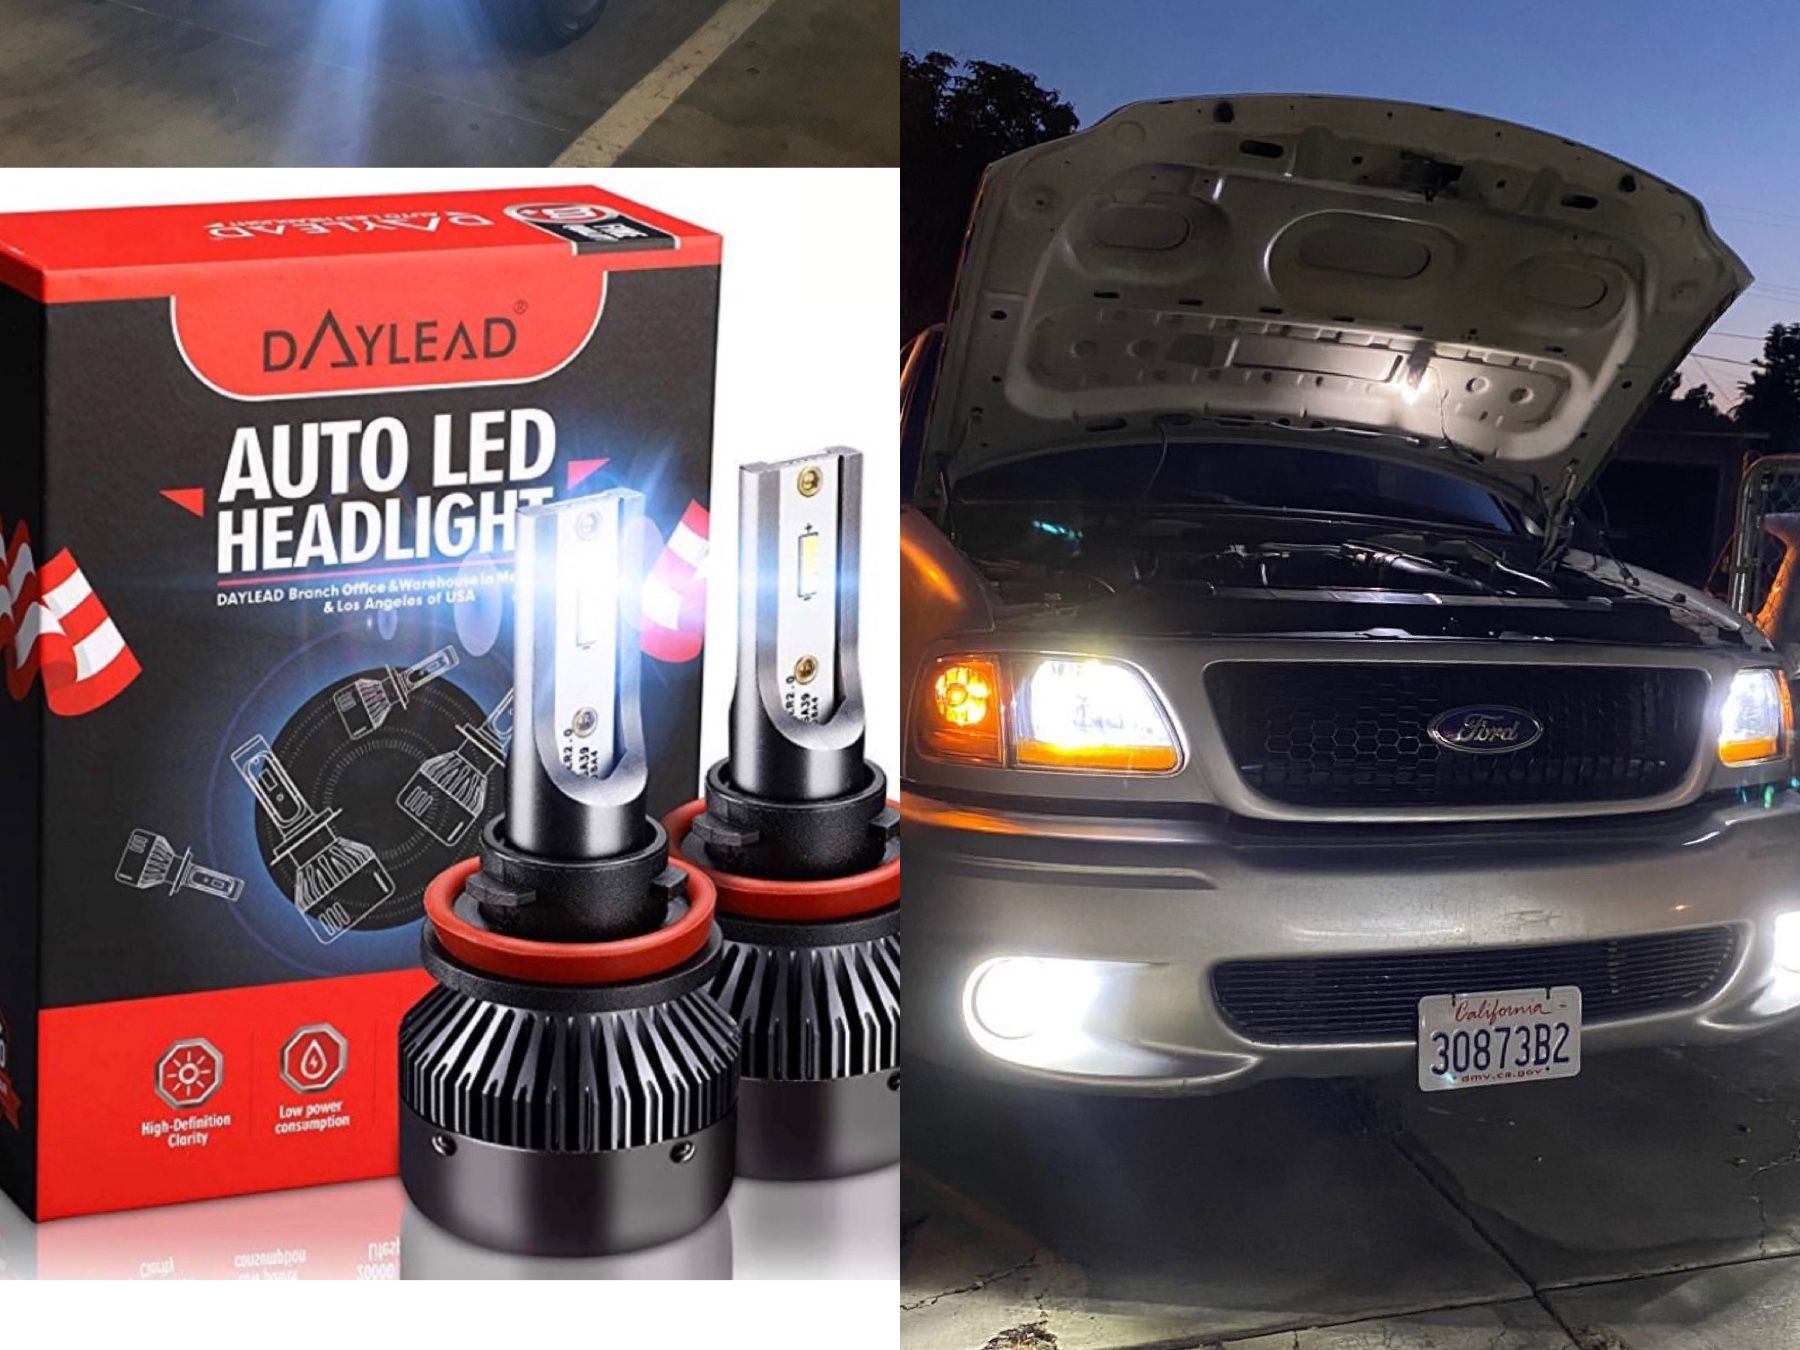 Led Headlights 25$ Free License Plate LEDs With Purchase